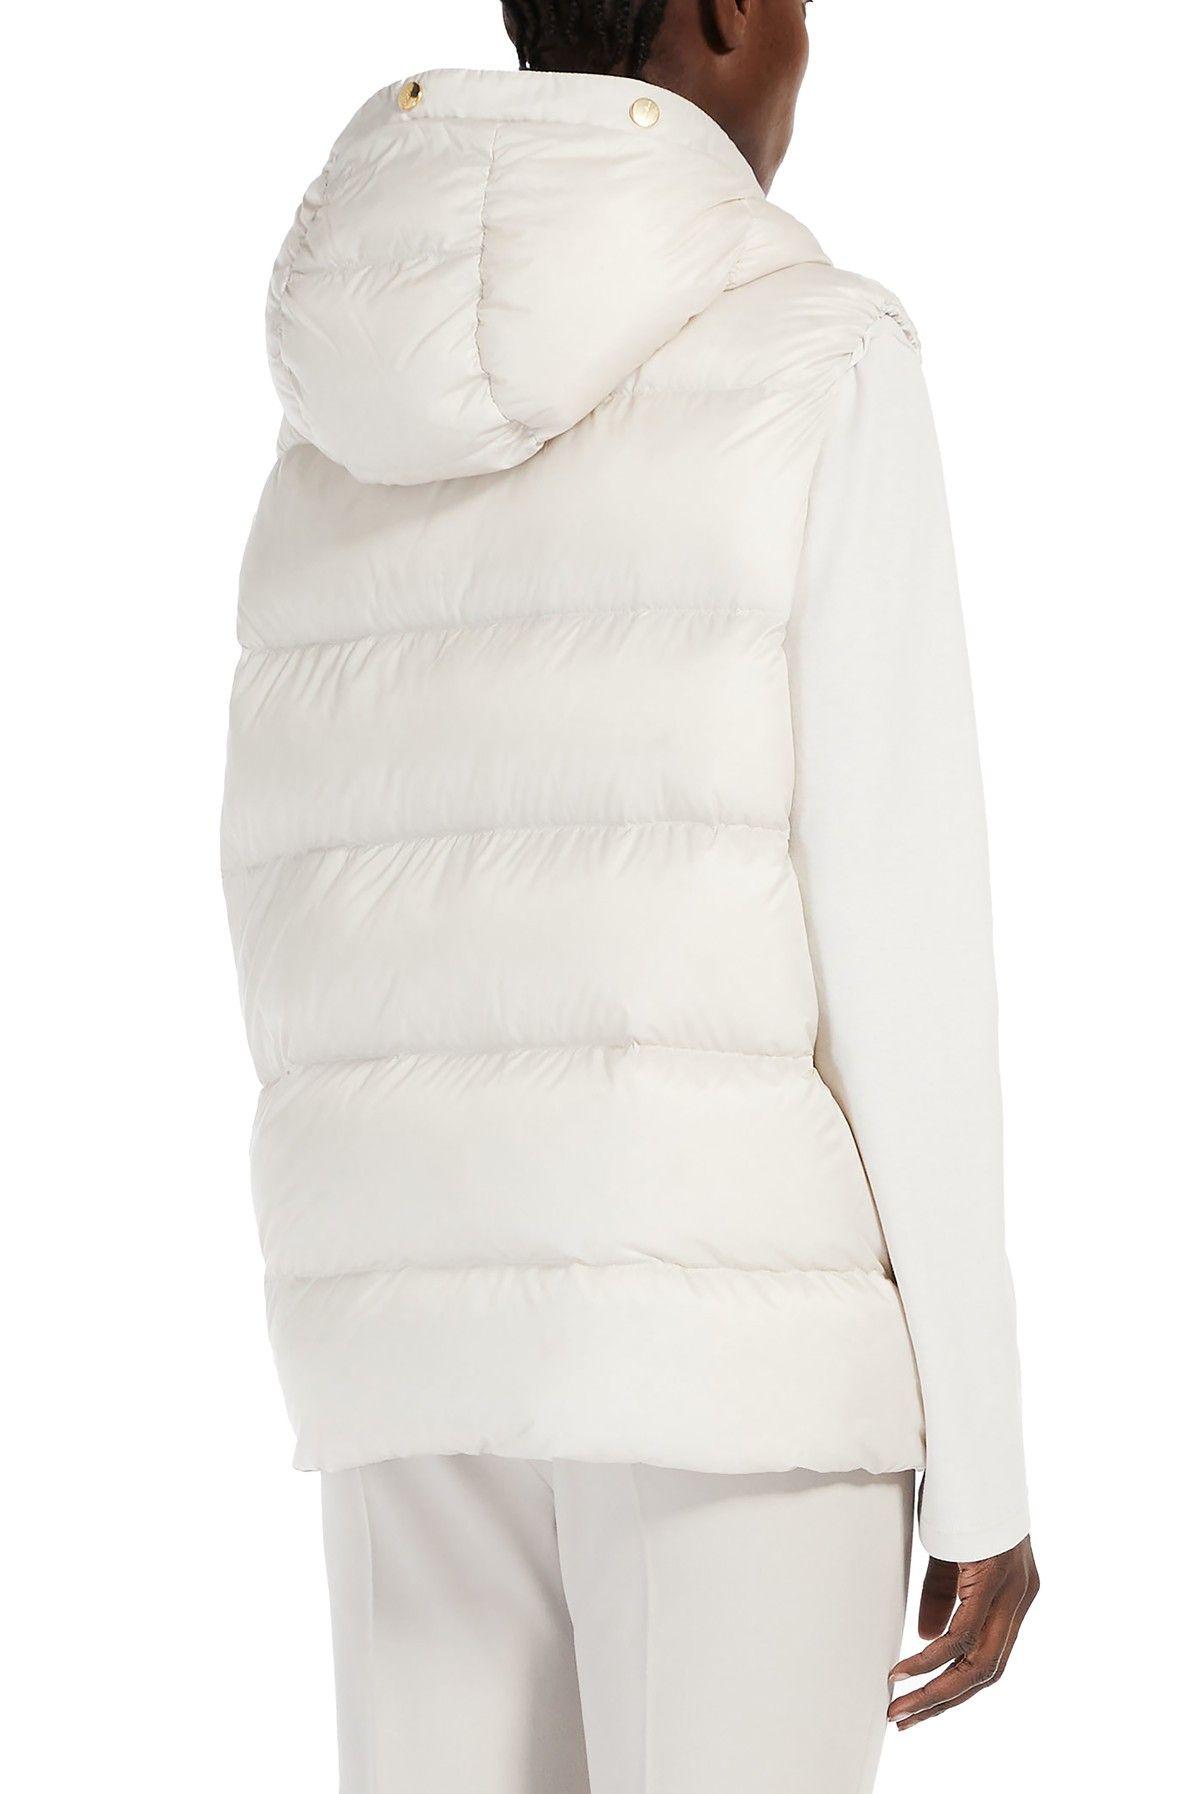 Max Mara Jsoft Reversible Water-repellent Canvas Gilet - The Cube in  Natural | Lyst